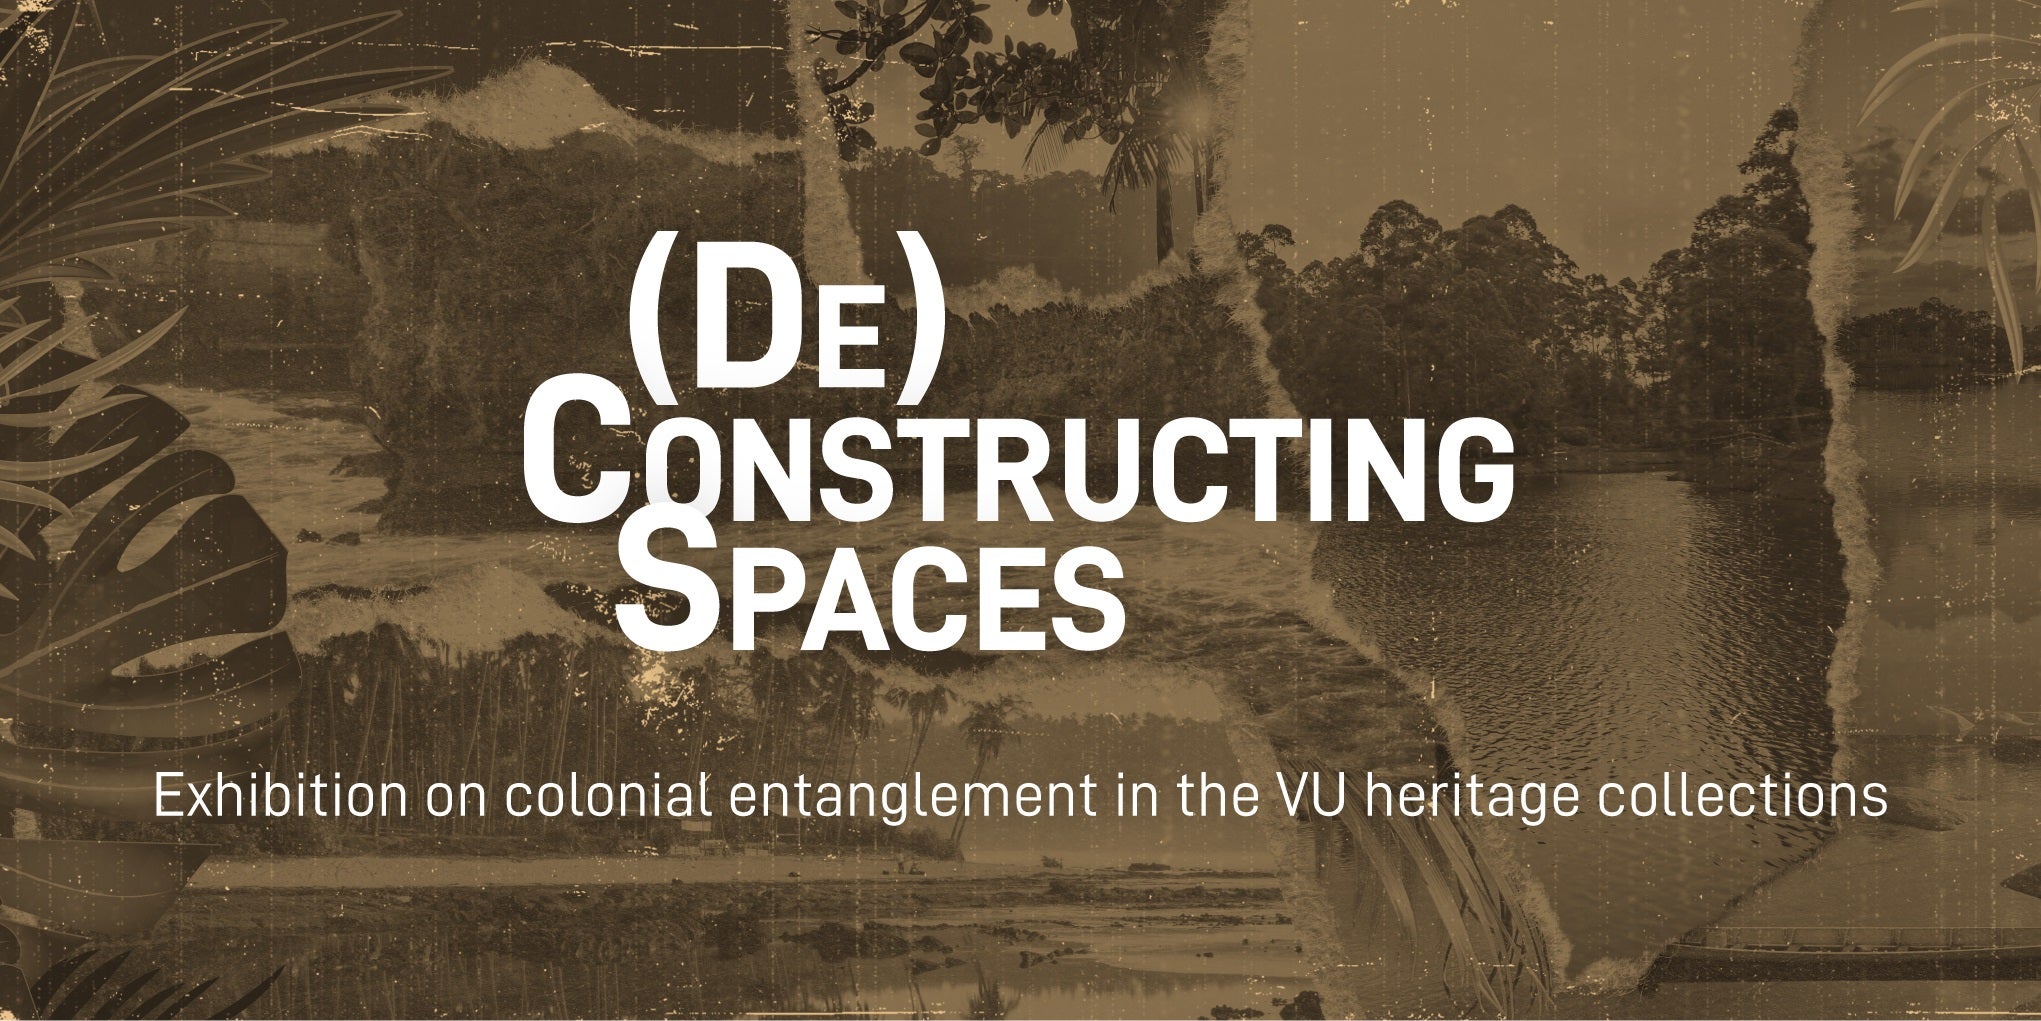 A white-lettered text with 'De-constructing spaces - exhibition on colonial entanglement in the VU heritage collections' with a collage of sepia photographs depicting colonial scenes as the background